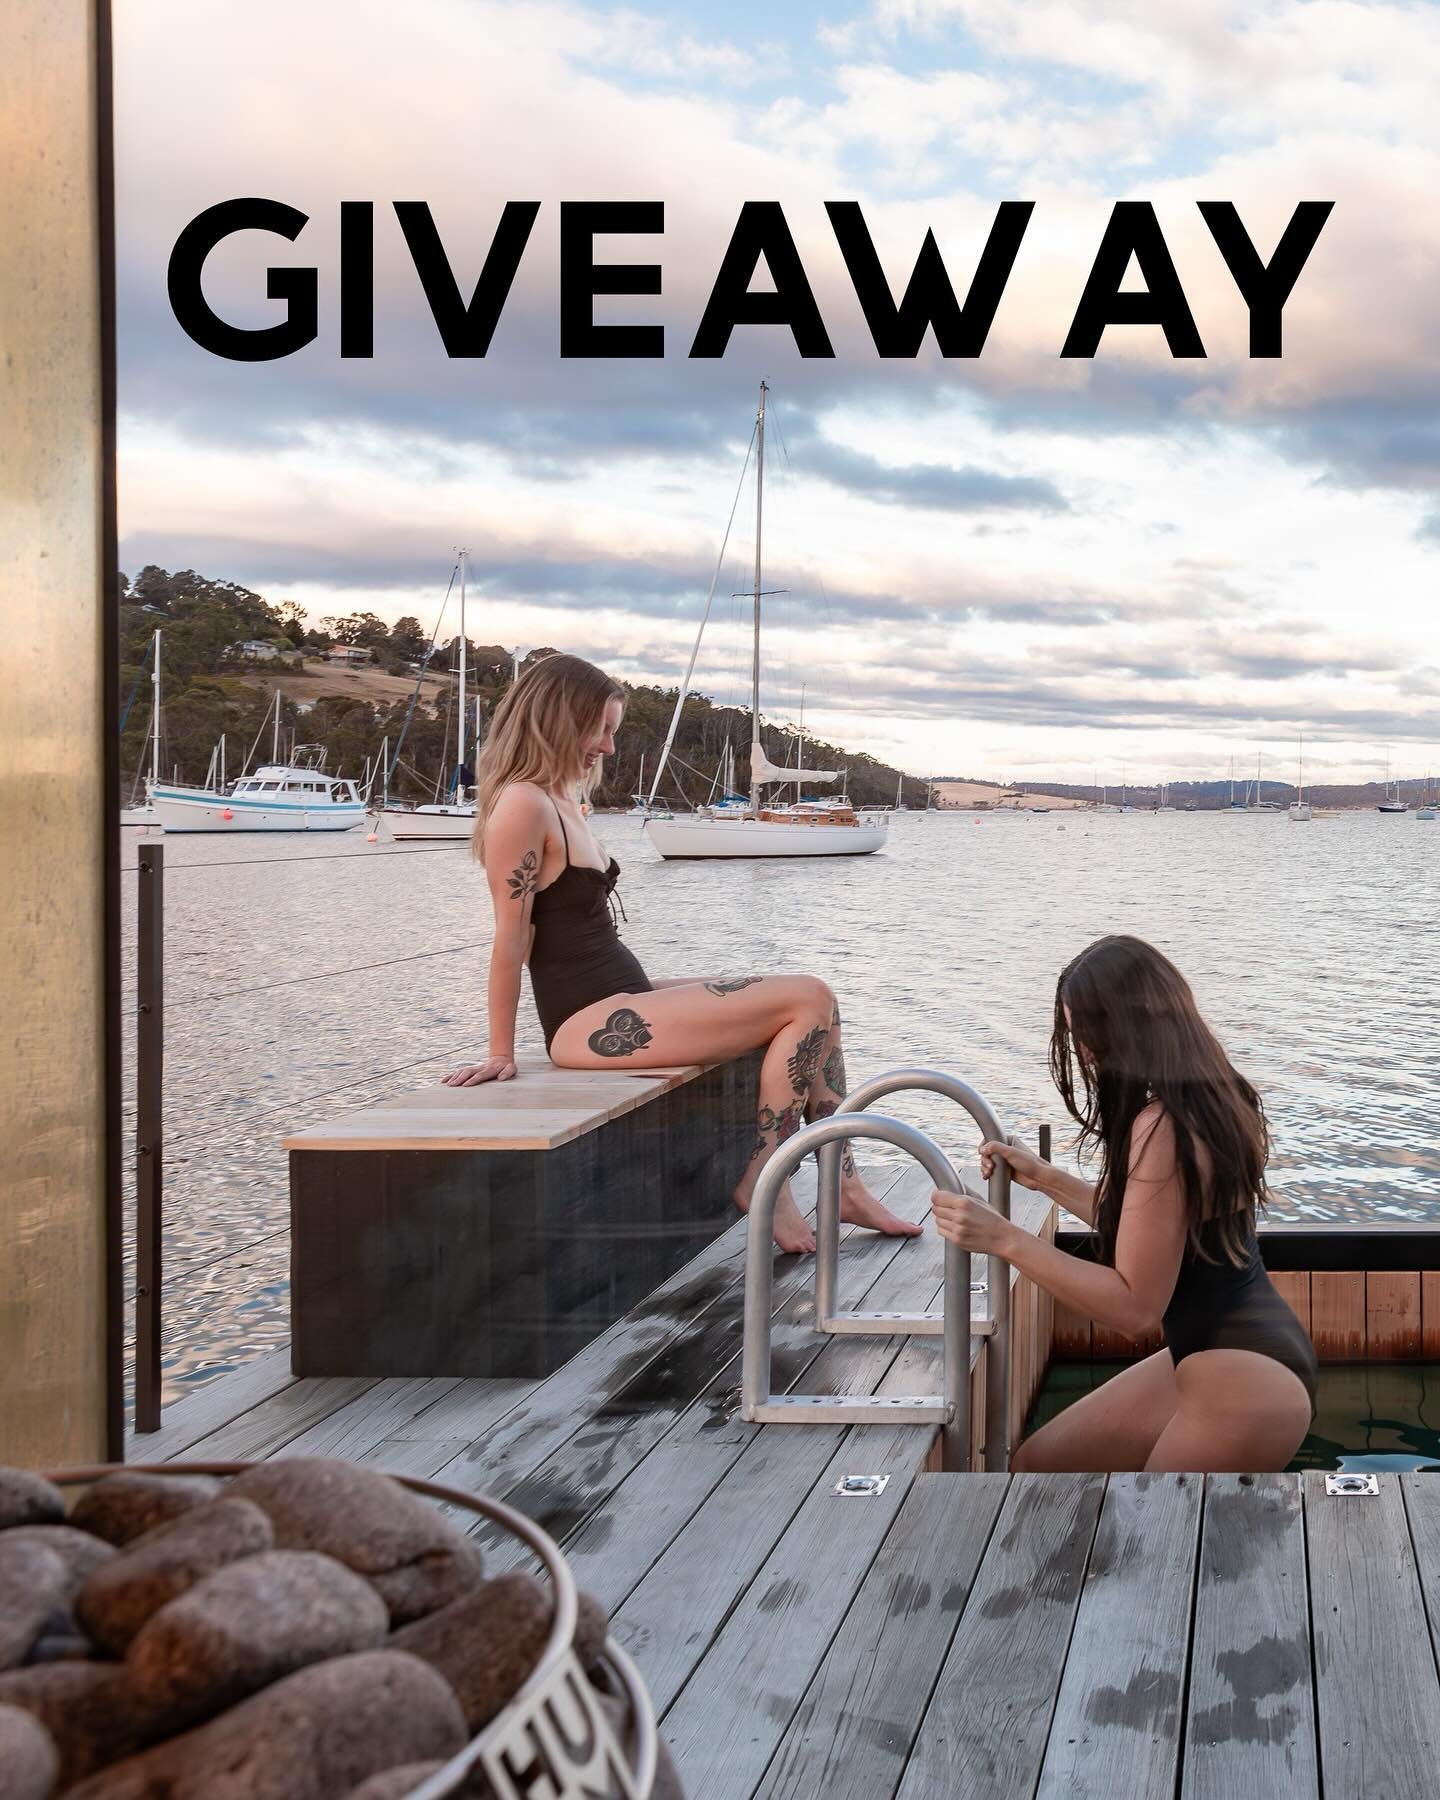 🎉 Giveaway Alert! 🎉

To celebrate the launch of Sauna Boat Tasmania next weekend, we&rsquo;re hosting an exciting giveaway! 🚤💨

Enter for your chance to win two private sauna sessions on us! 🔥

How to Enter:

1. Follow us @saunaboattasmania
2. L